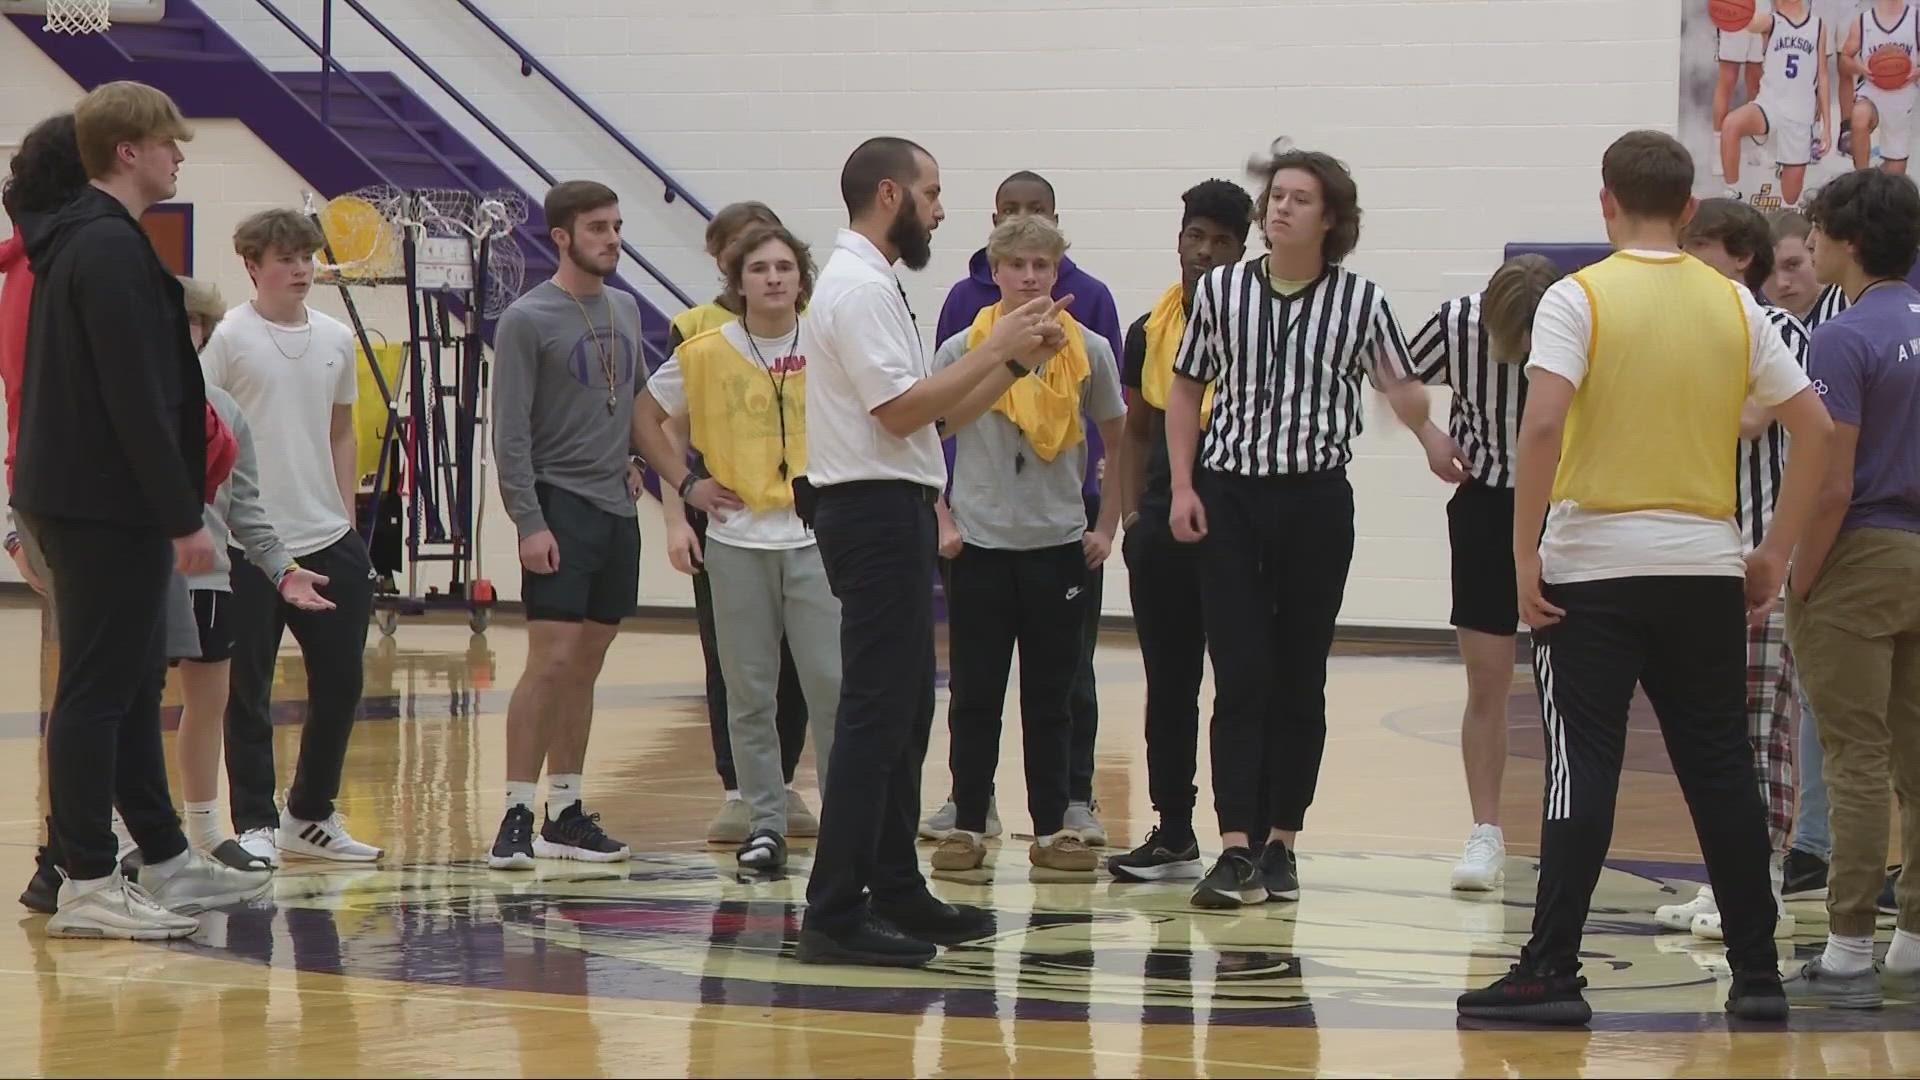 Dan Rodriguez teaches an elective at Jackson High School that teaches students how to officiate games, and maybe even make some extra cash.